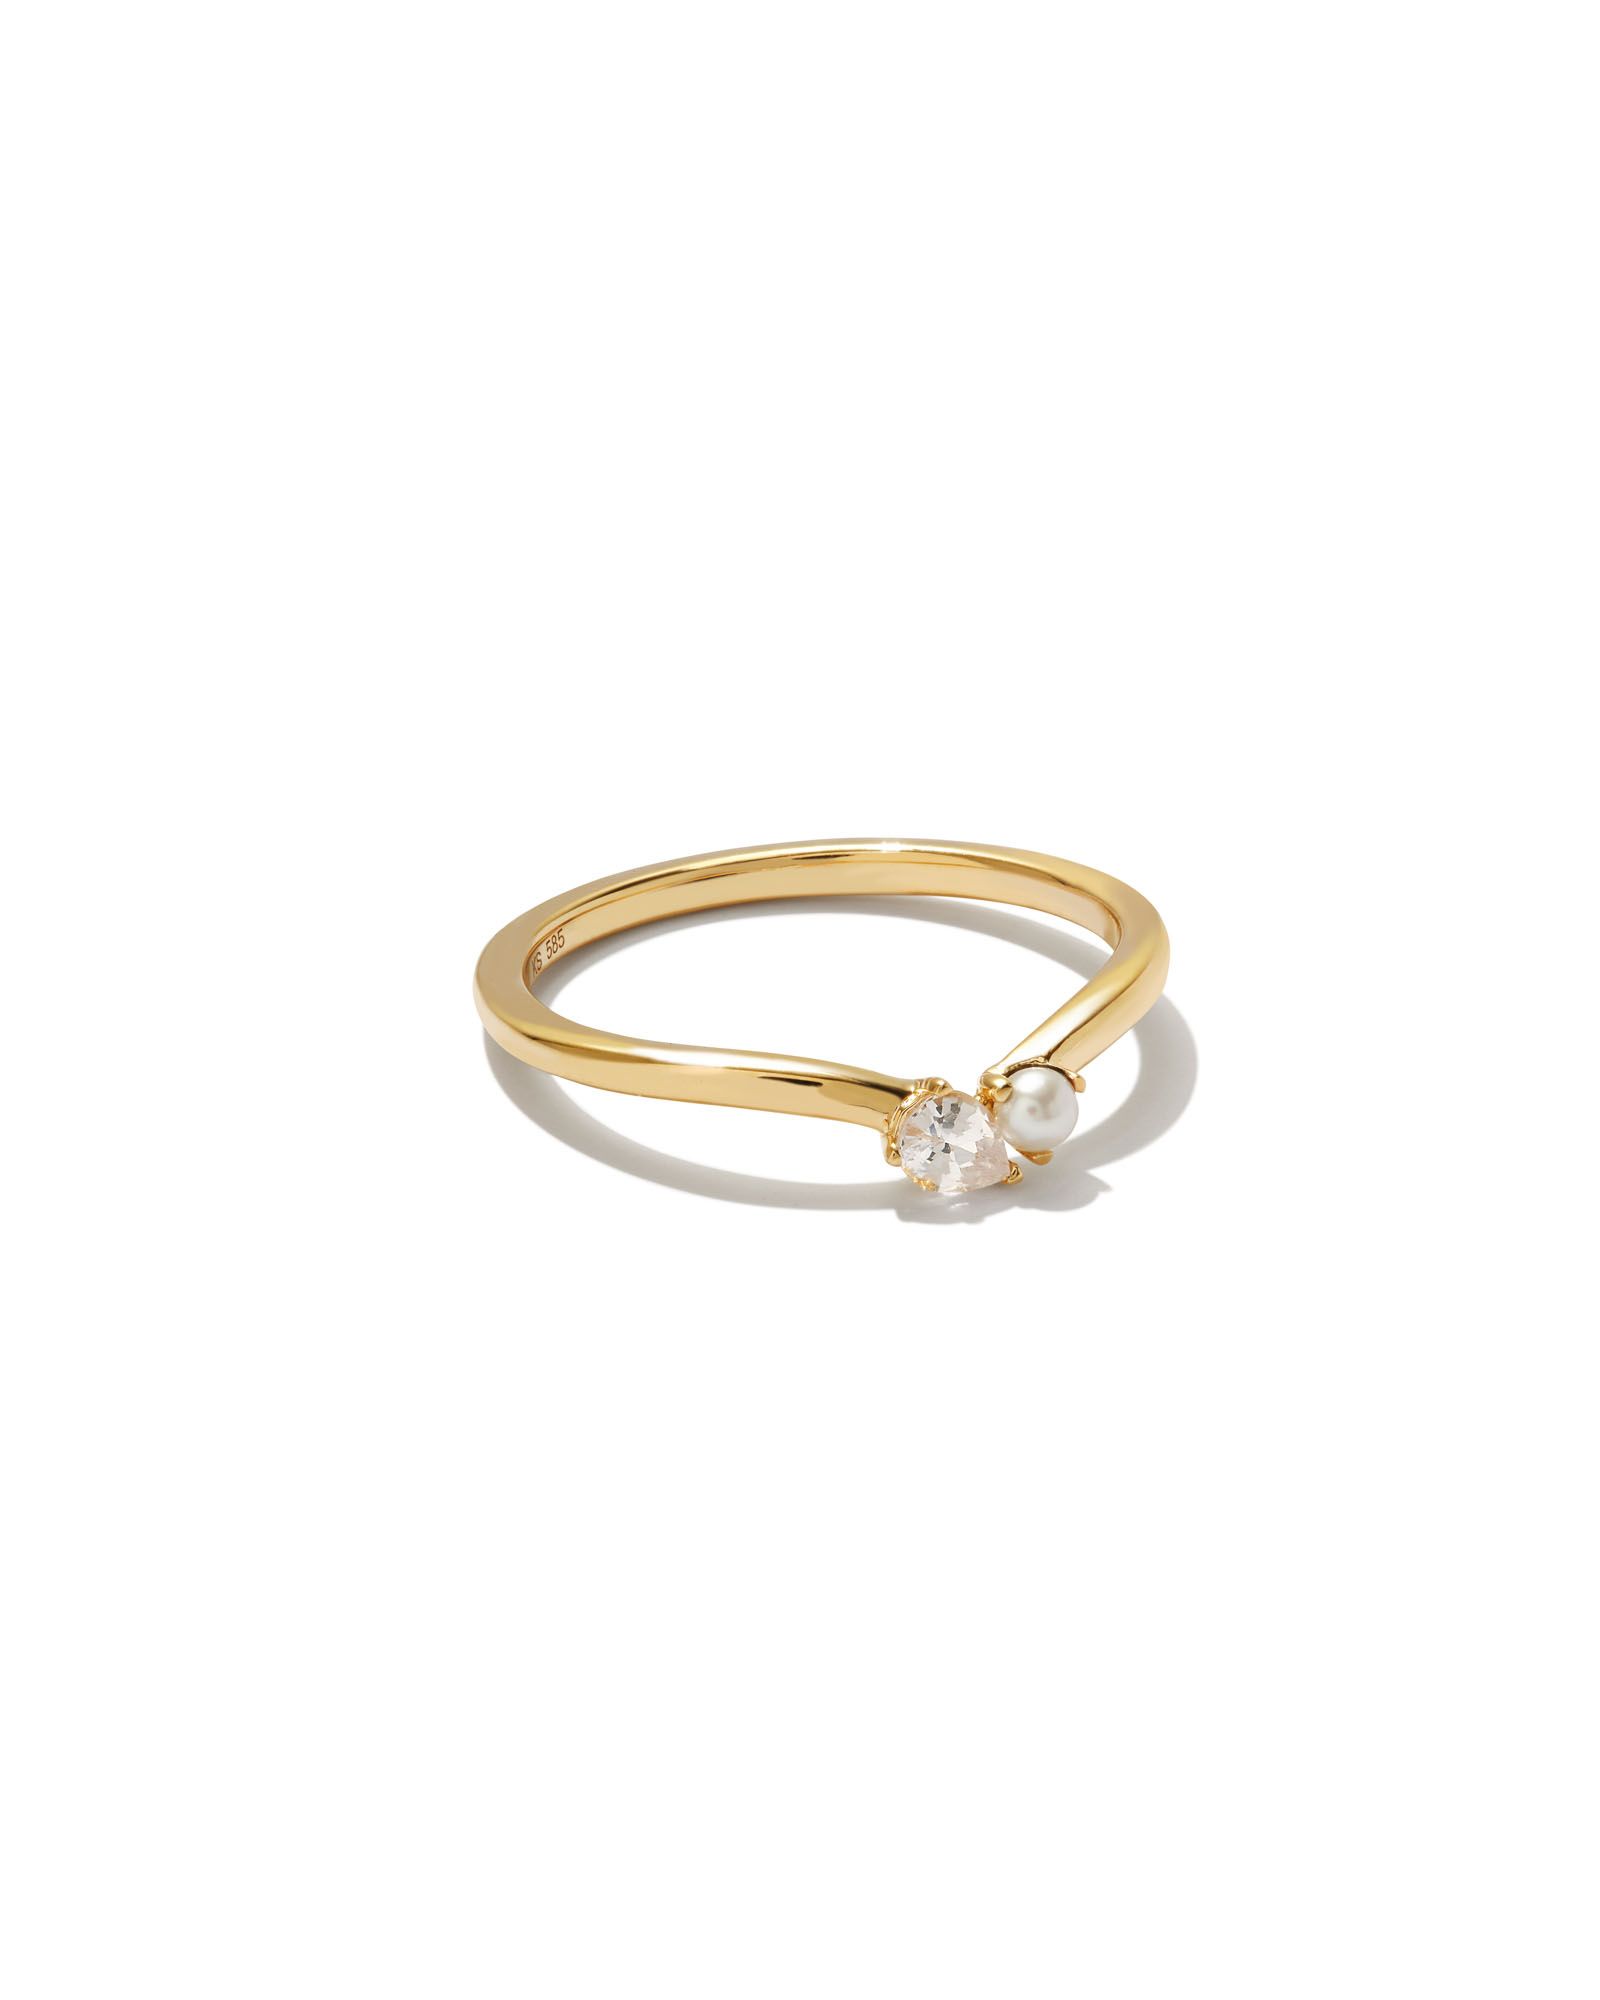 Toi et Moi 14k Yellow Gold Band Ring in White Sapphire and White Pearl | Kendra Scott